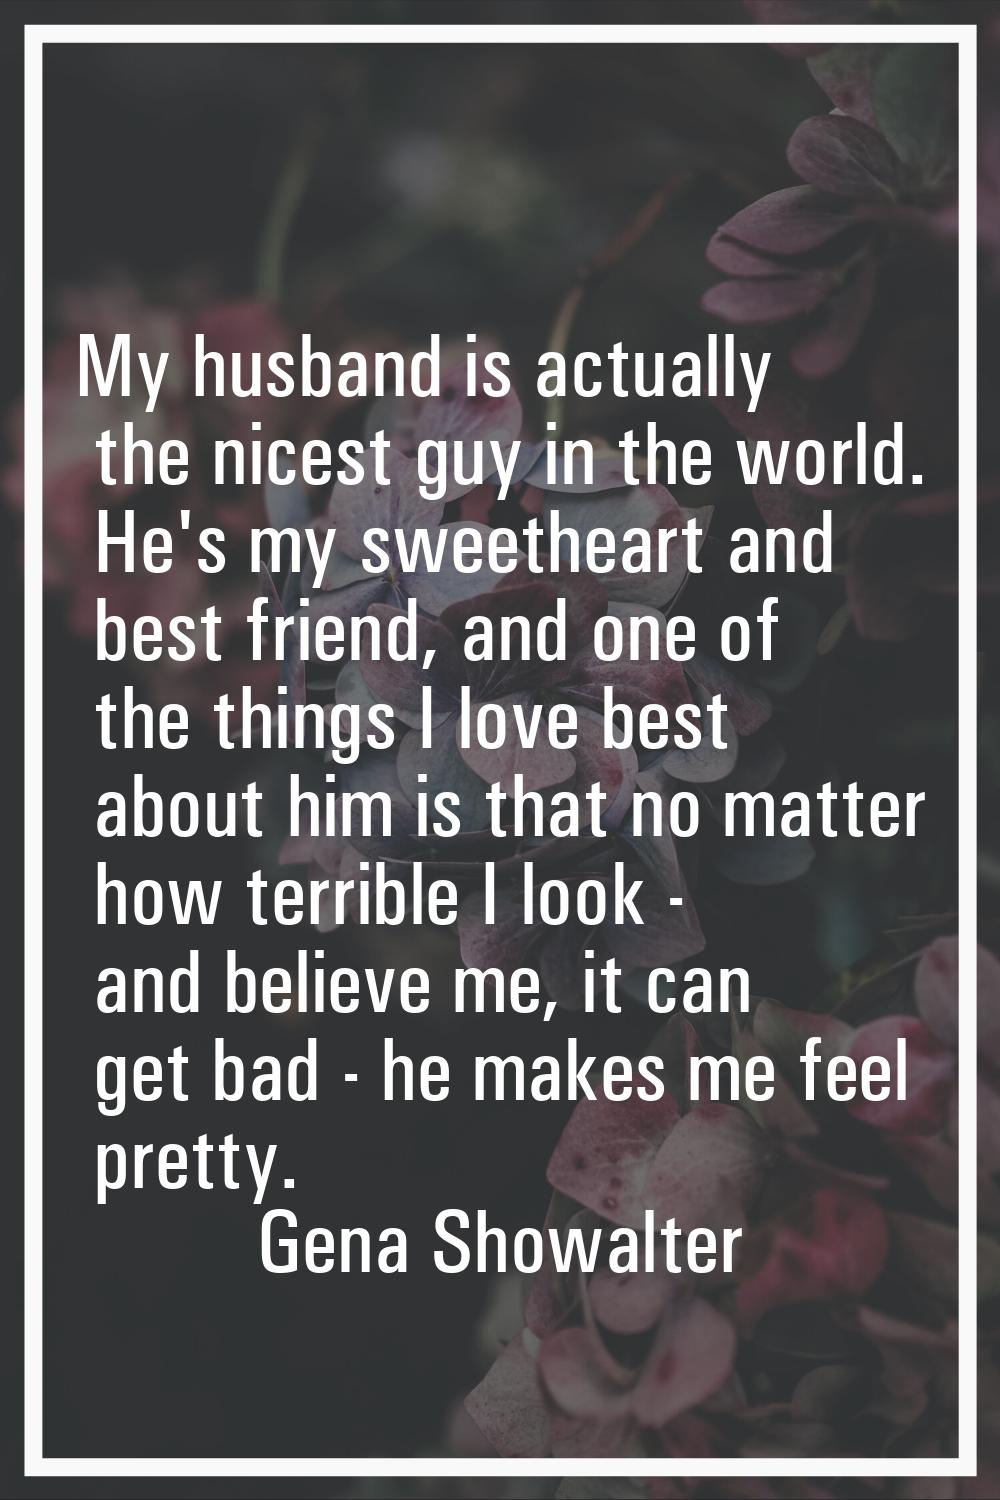 My husband is actually the nicest guy in the world. He's my sweetheart and best friend, and one of 